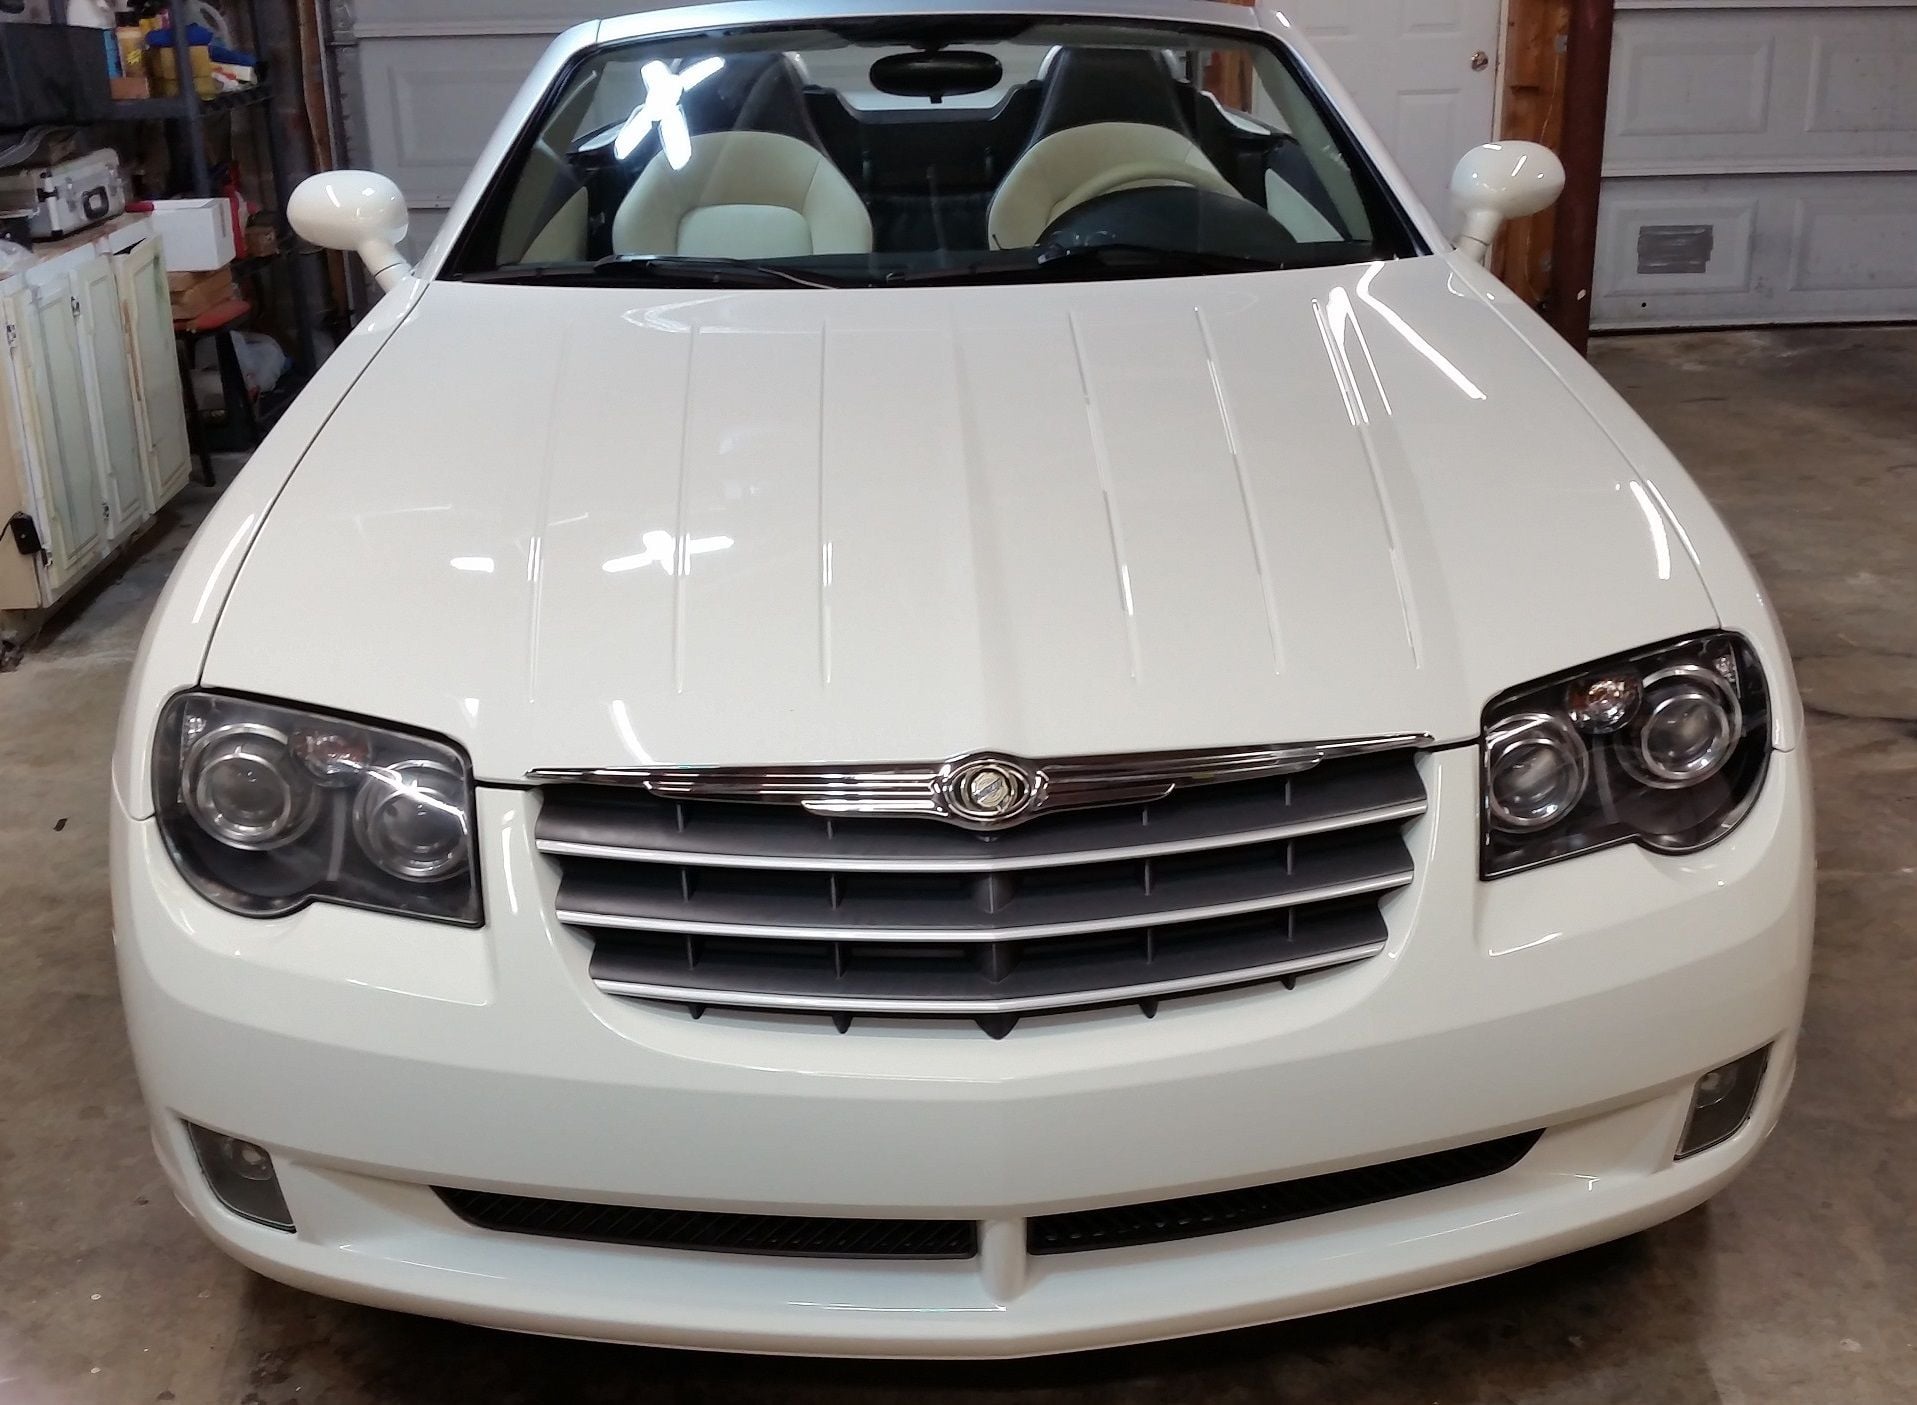 2005 Chrysler Crossfire - 2005 Chrysler Crossfire Limited Roadster, A+ condition - Used - VIN 1C3AN65L65X051677 - 45,221 Miles - 6 cyl - 2WD - Automatic - Convertible - White - Pinson, AL 35126, United States